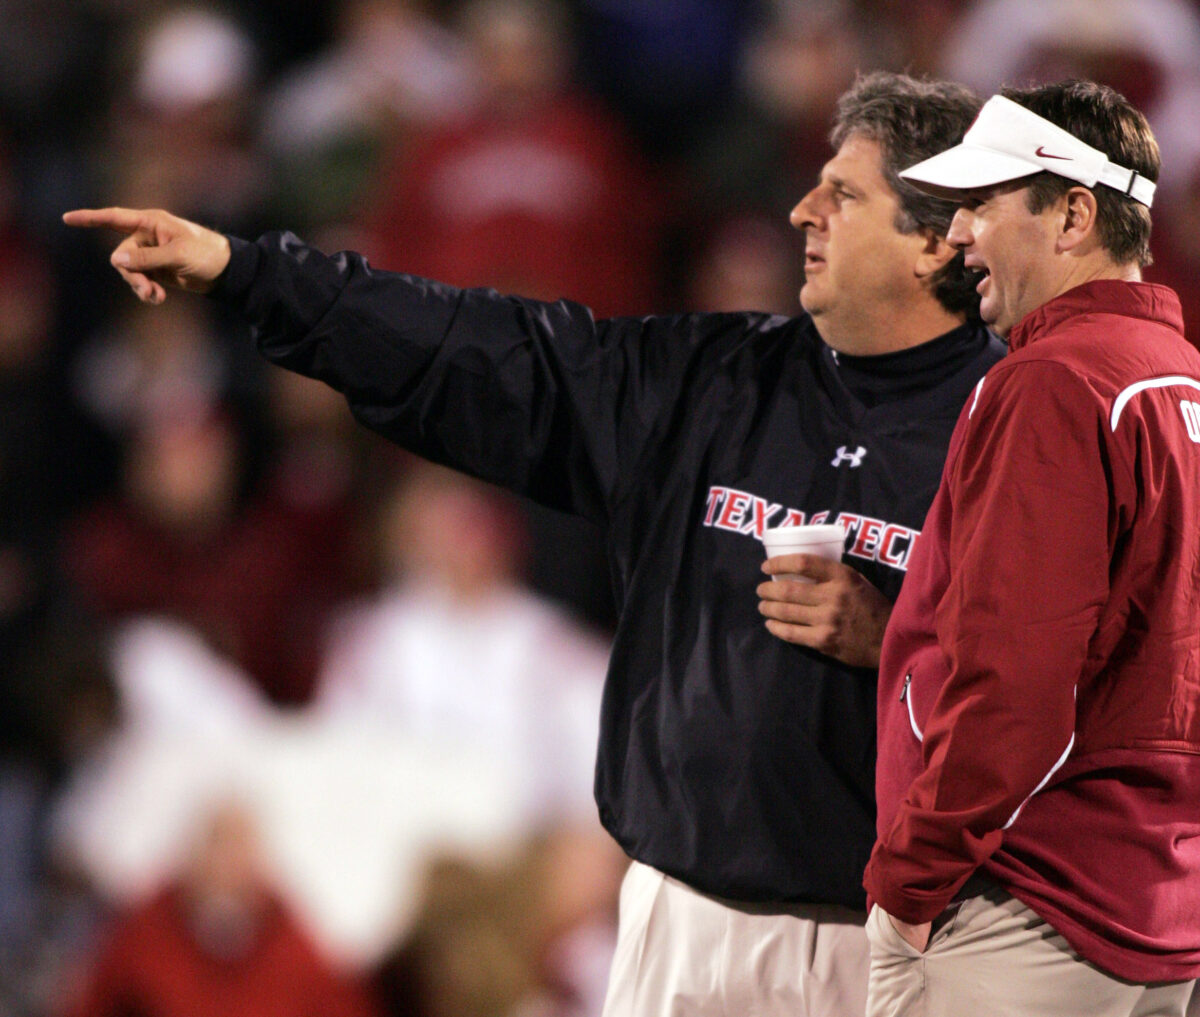 Bob Stoops, others supportive of Mike Leach to the College Football Hall of Fame